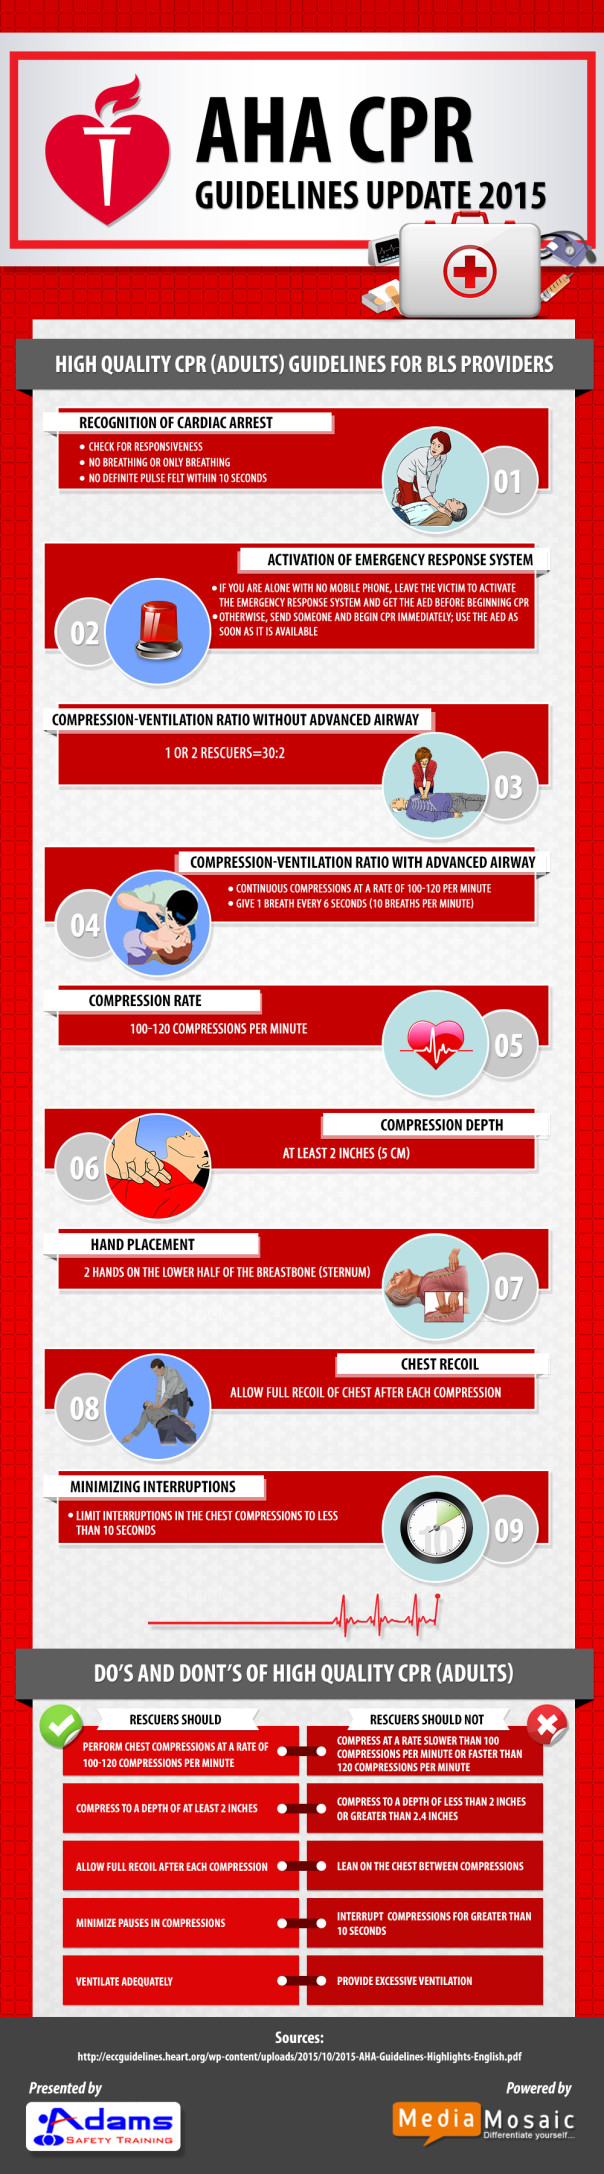 2015 AHA Guidelines Update for CPR